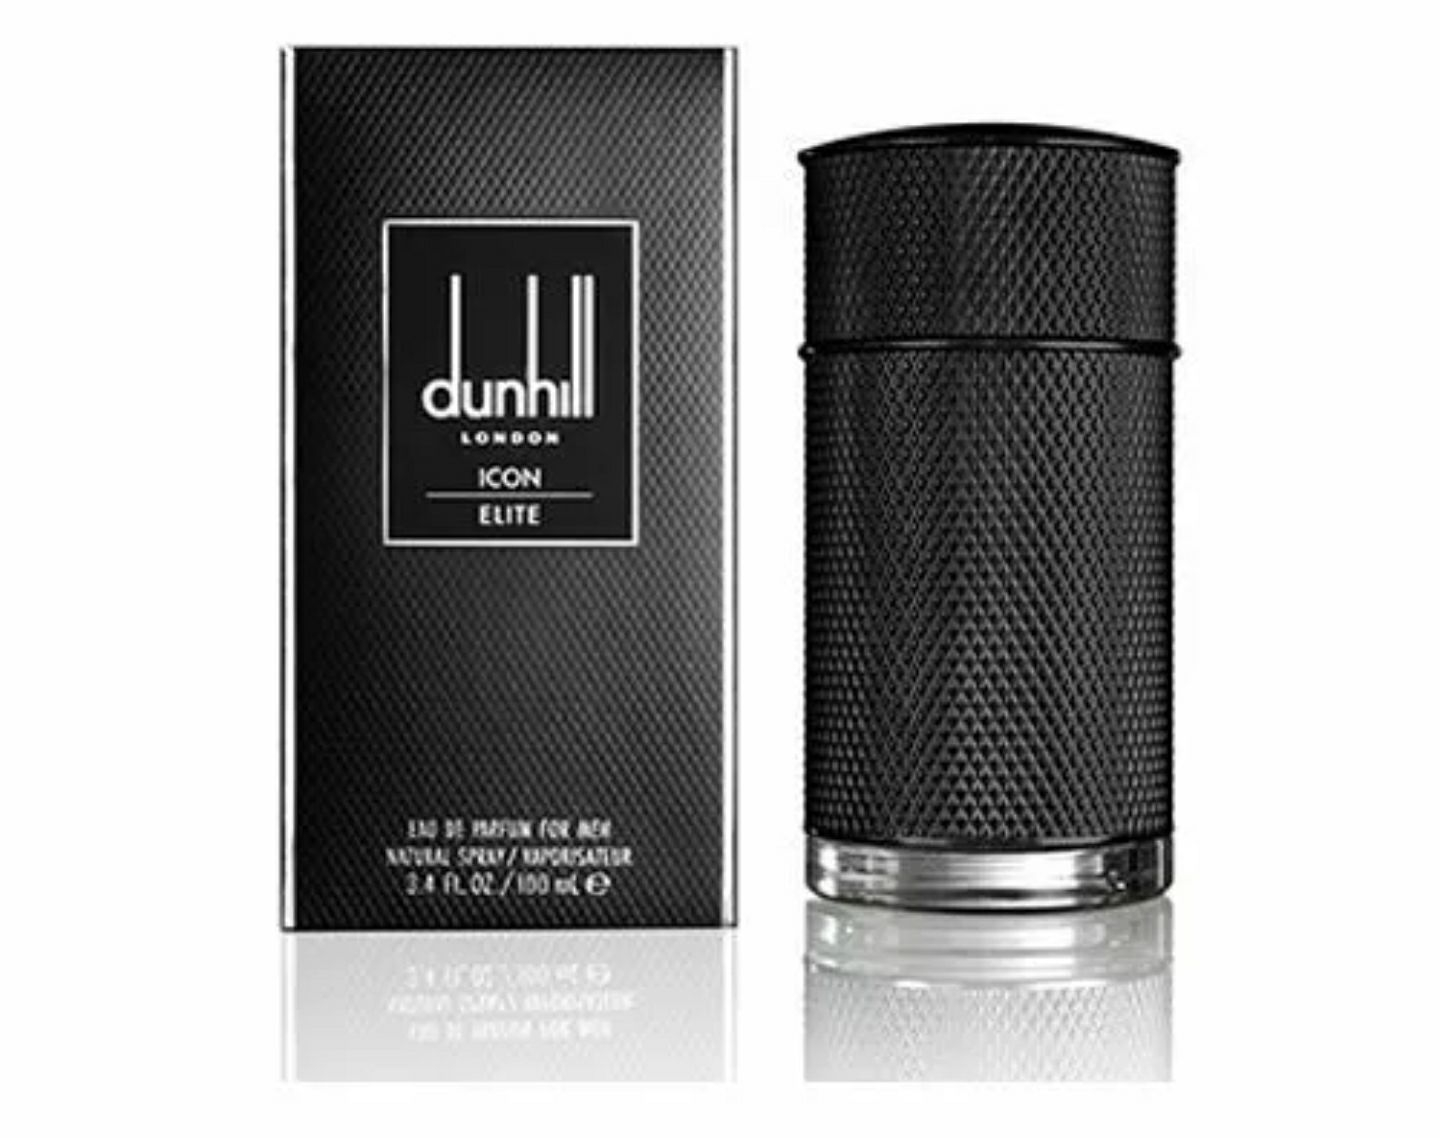 icon racing green by dunhill